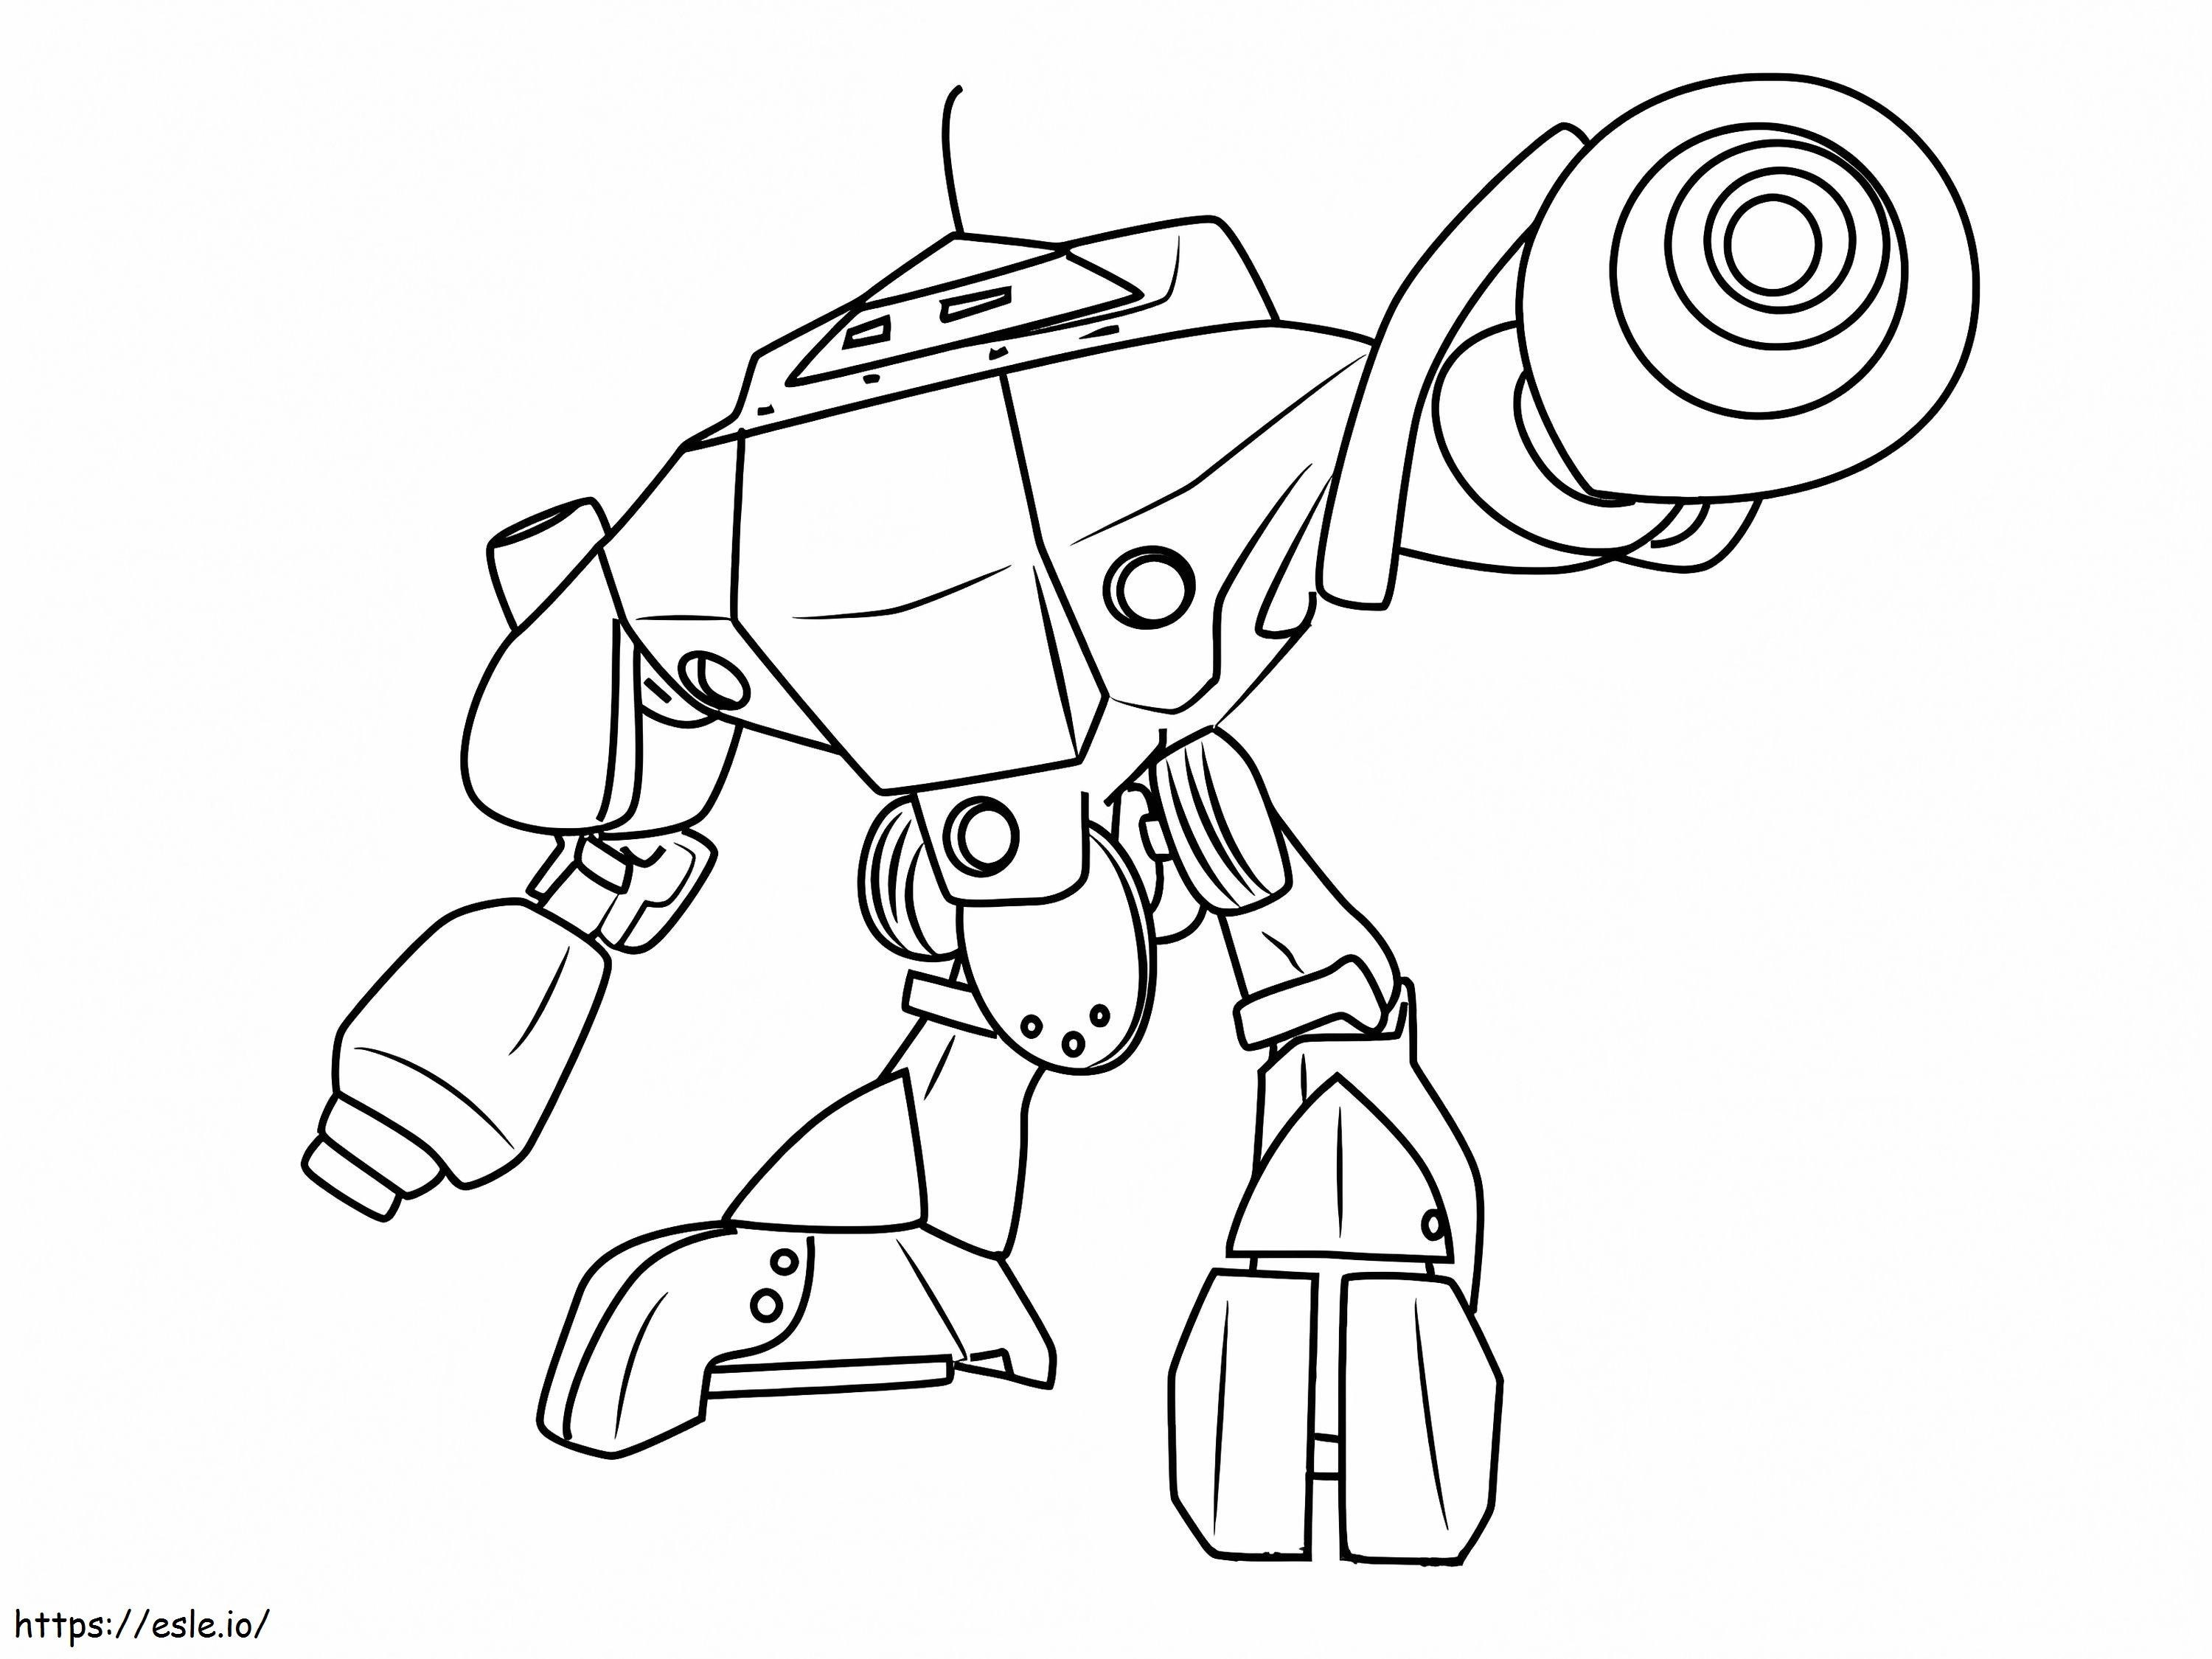 1599092470 How To Draw Super Probe From Boboiboy Step 0 coloring page